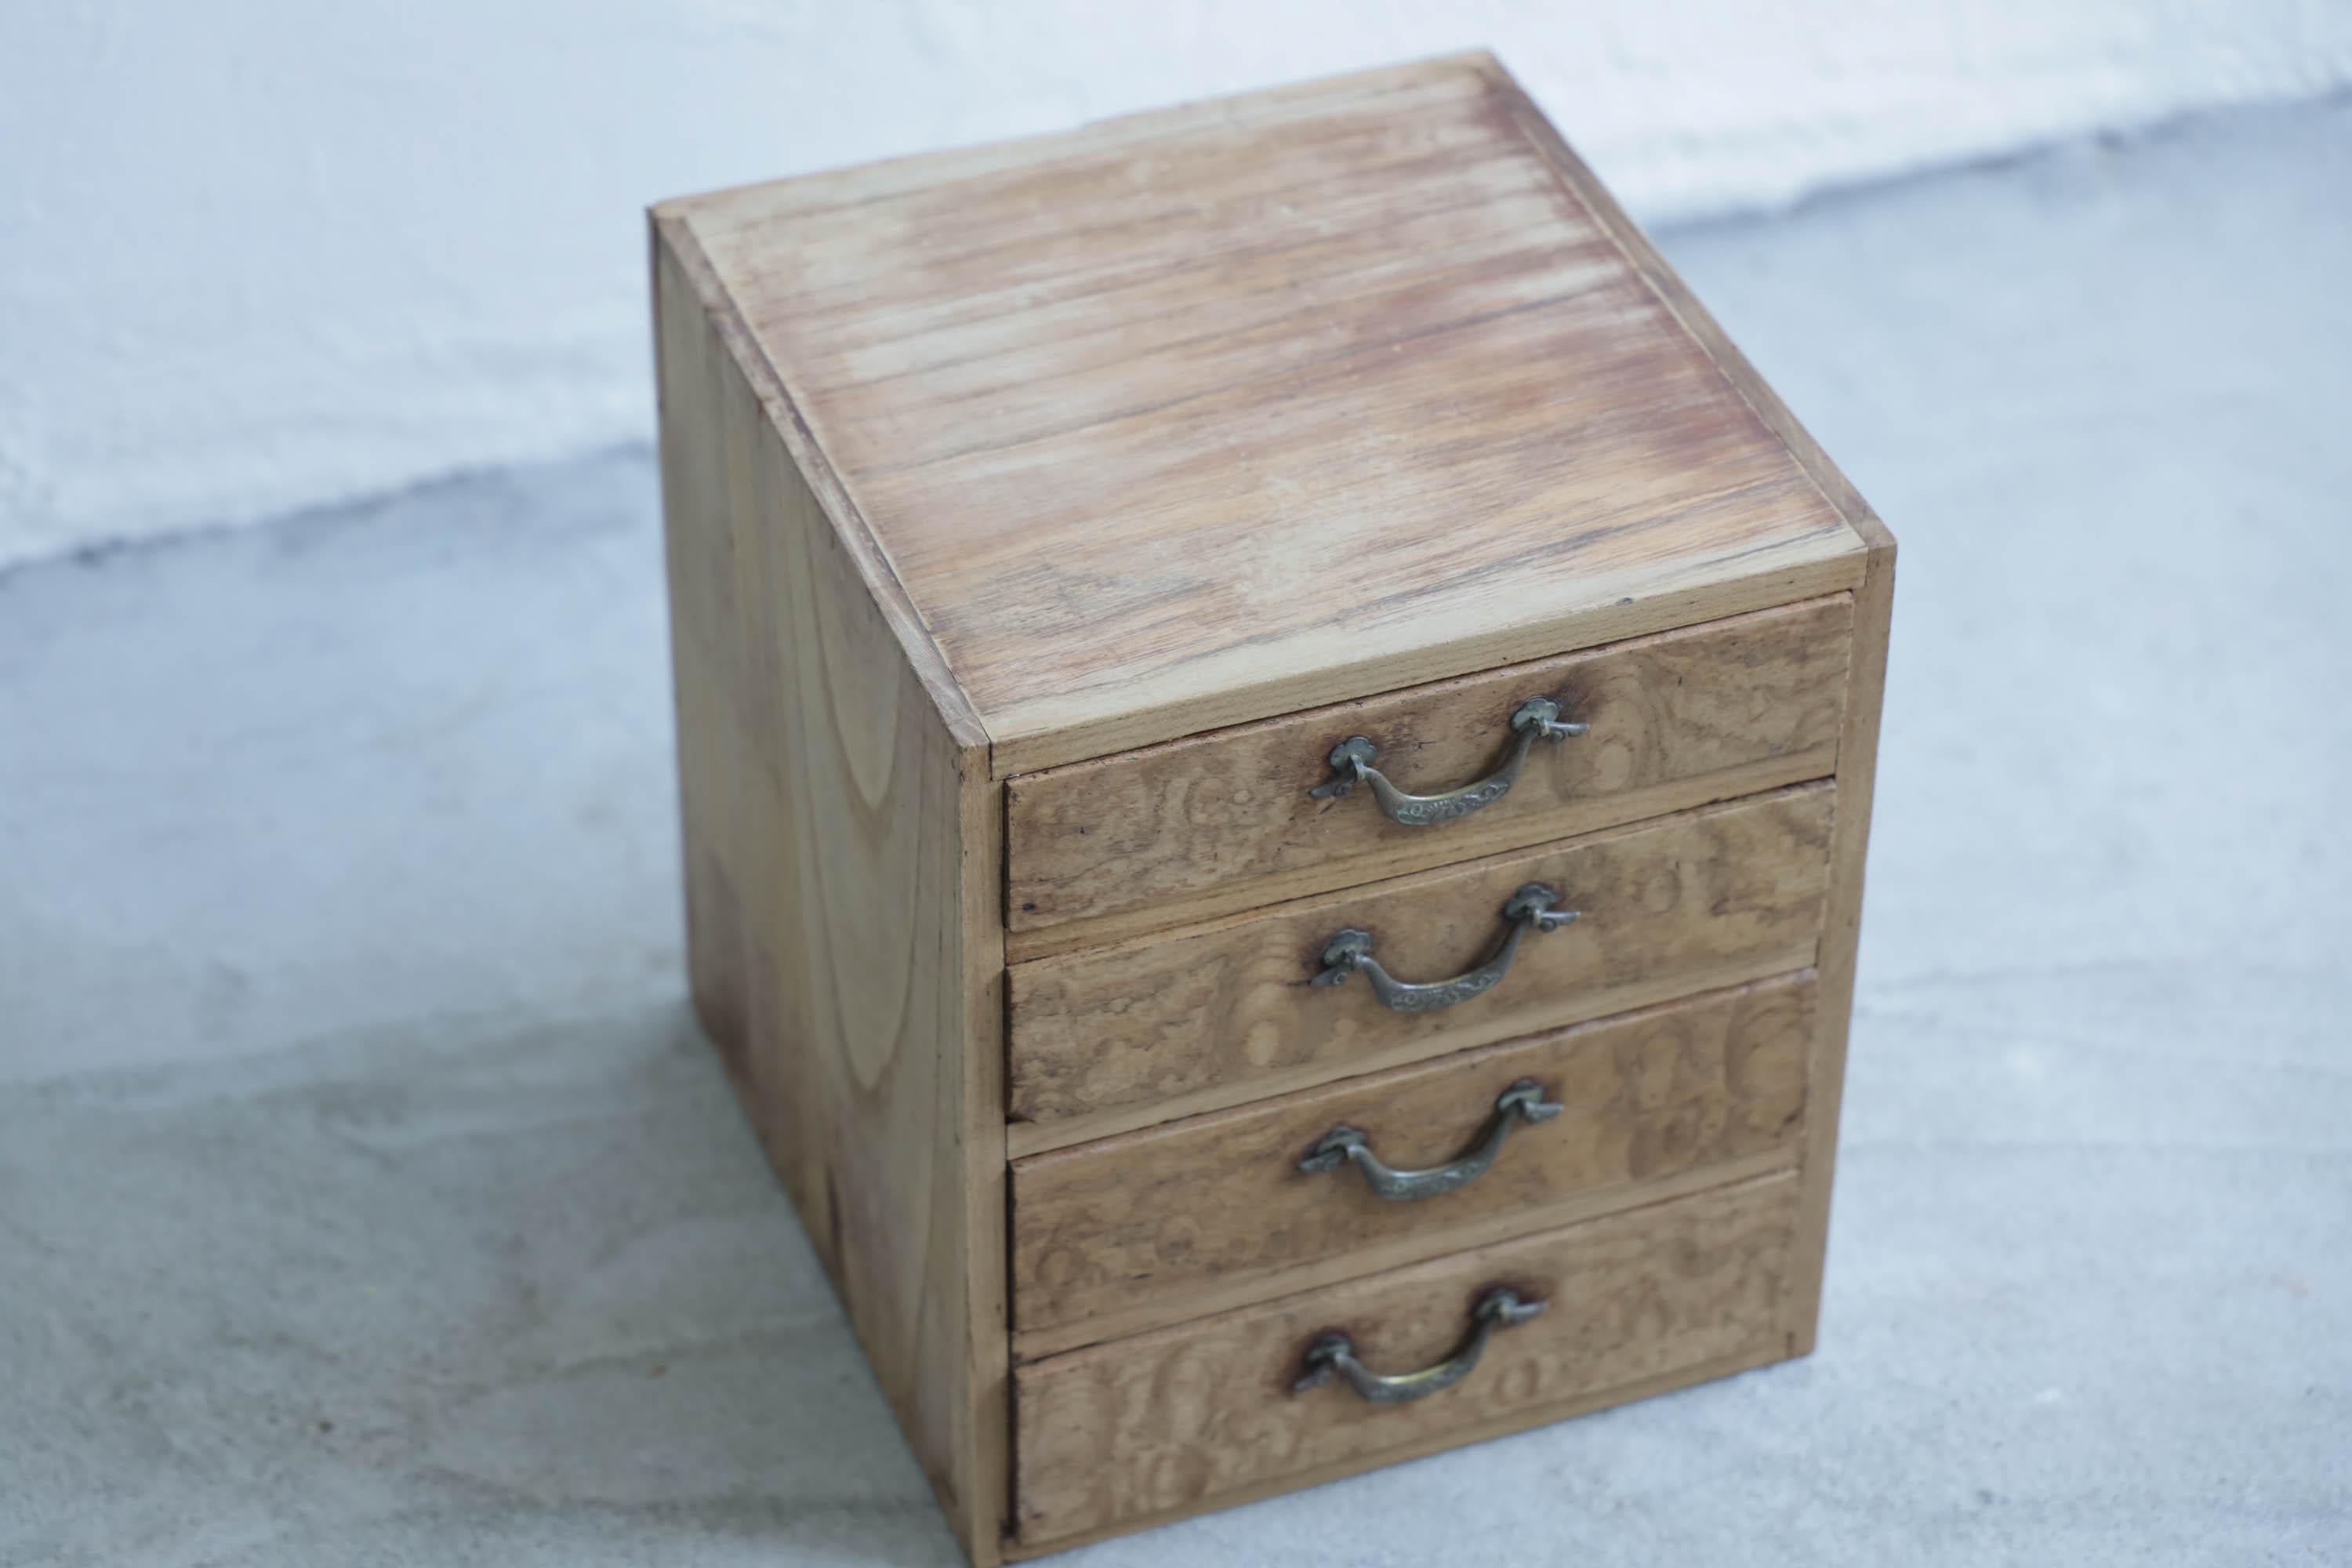 Hand-Crafted Japanese Antique Small Chests of Drawers 1860s-1900s /Tansu, Wabi-Sabi